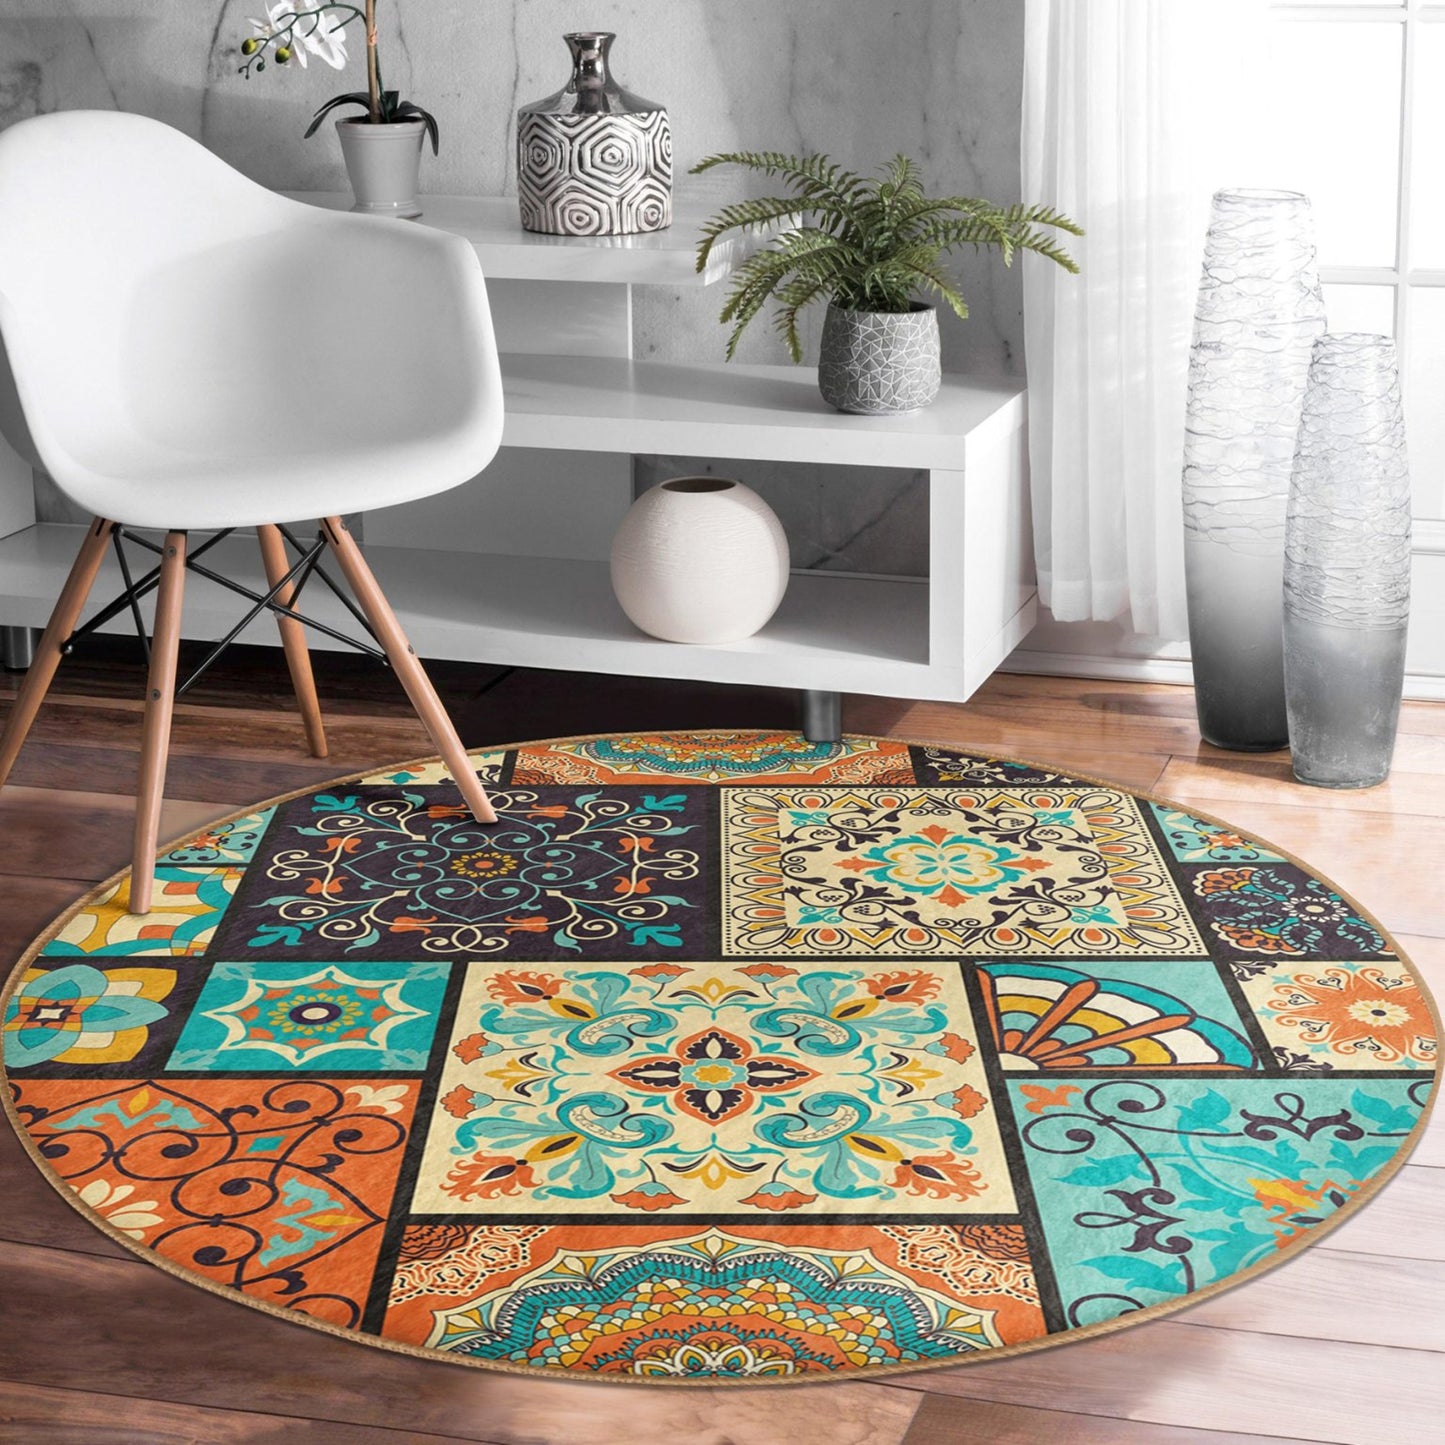 Cultural Home Rug with Ethnically Inspired Design